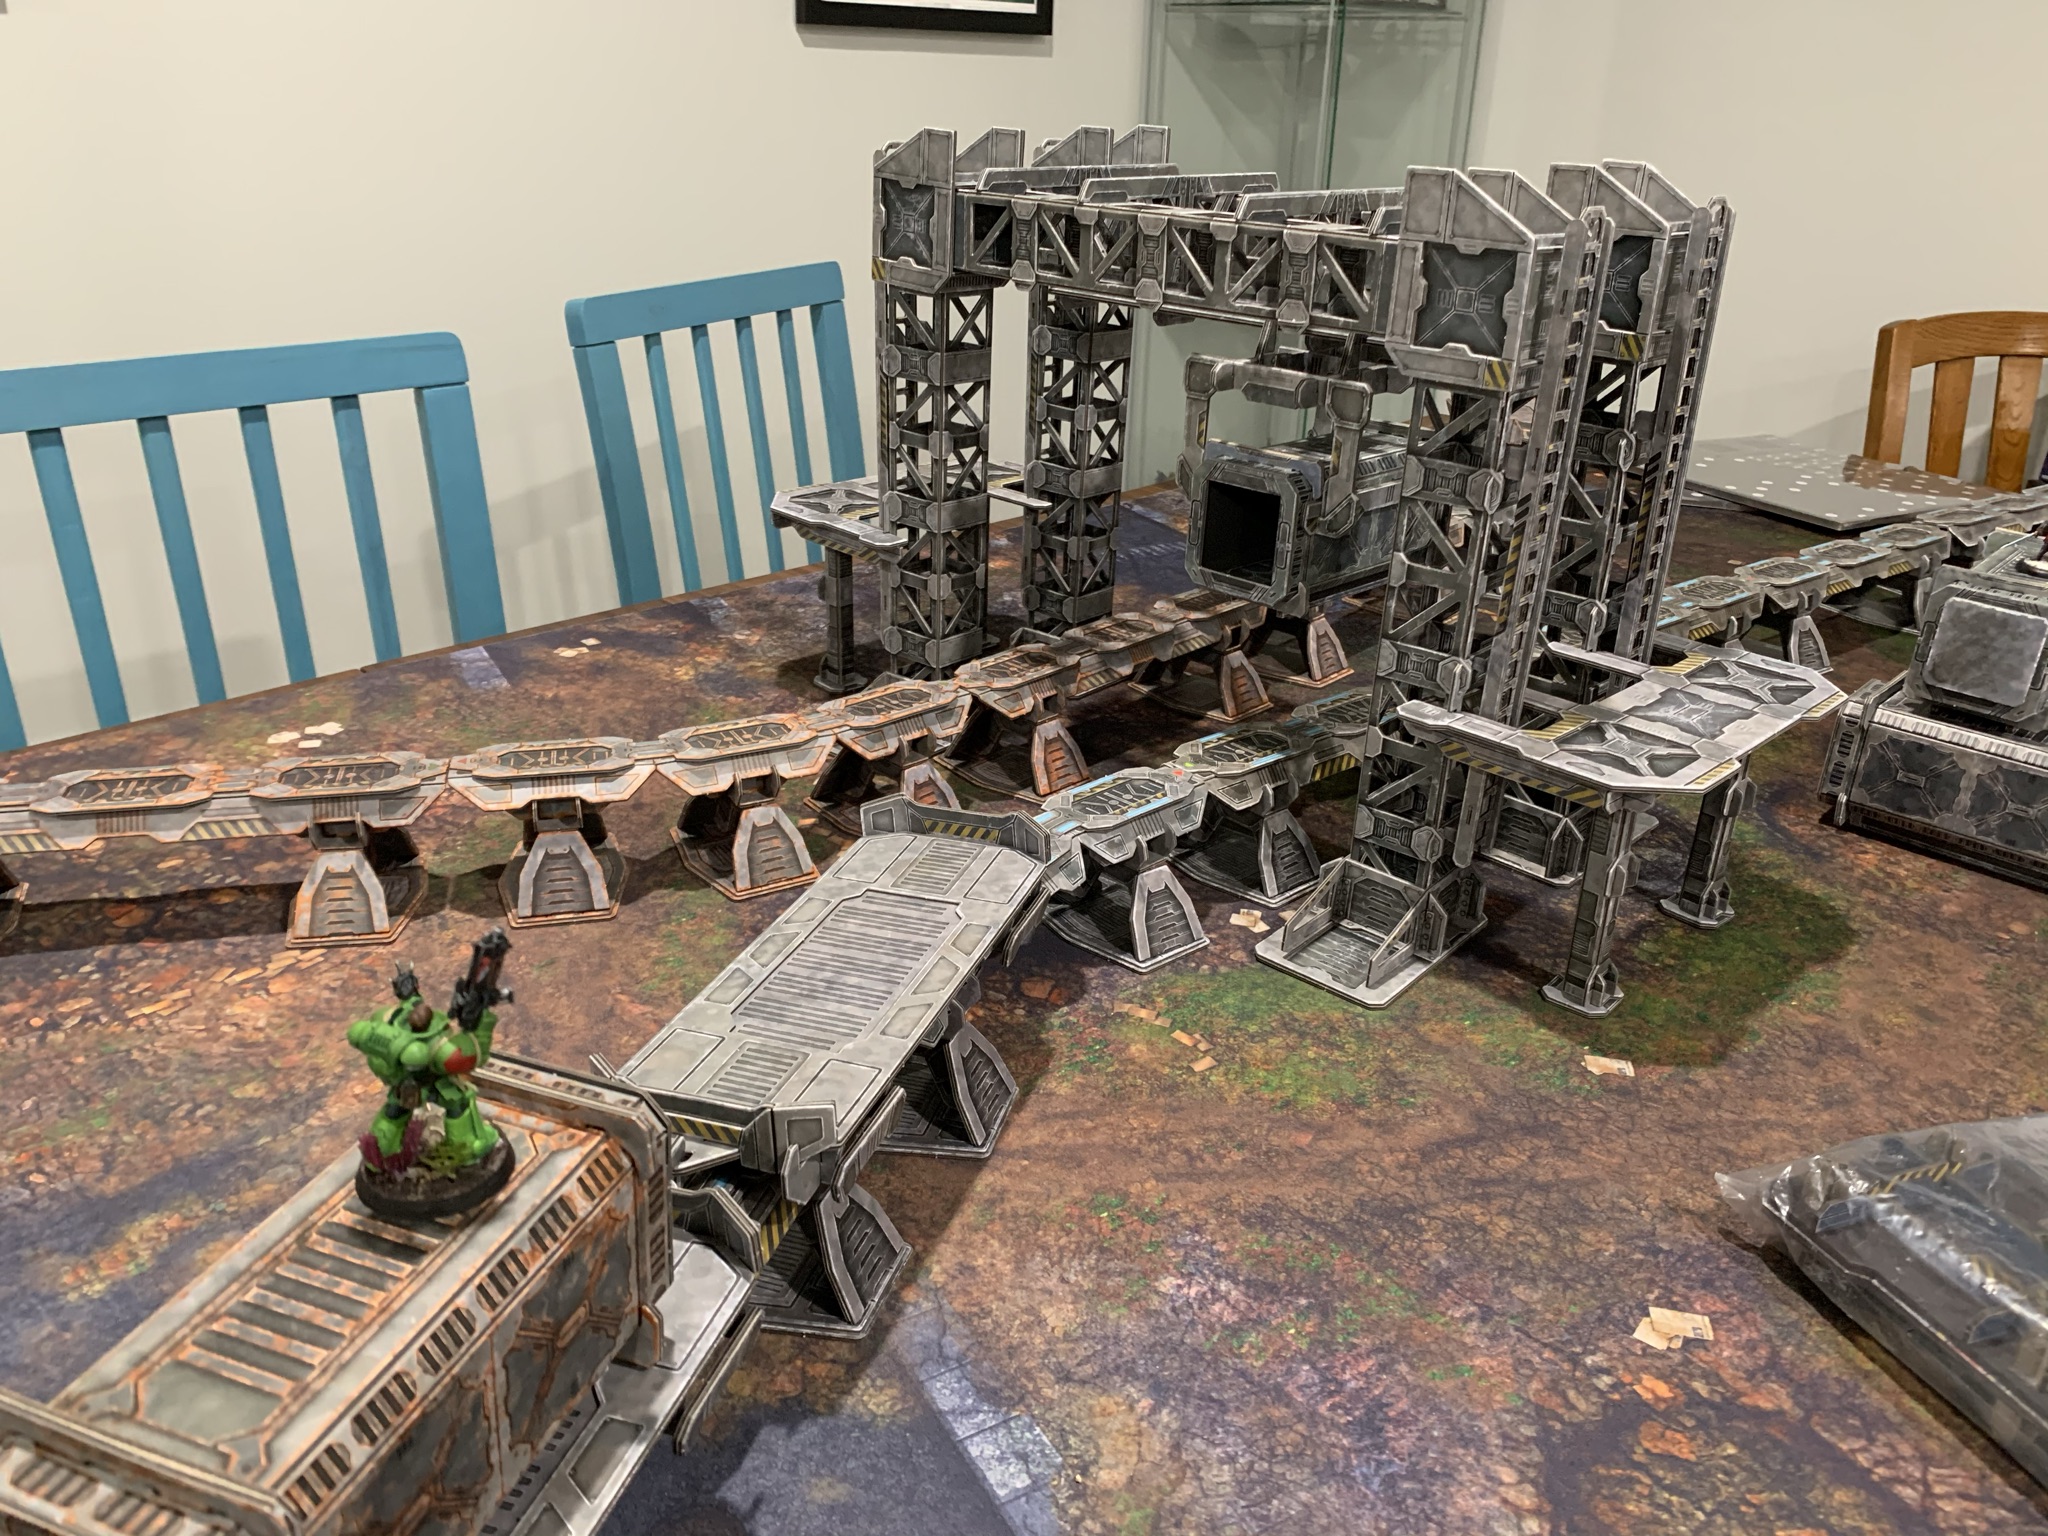 No Painting Needed – TinkerTurf Terrain Fills out a Table Quickly